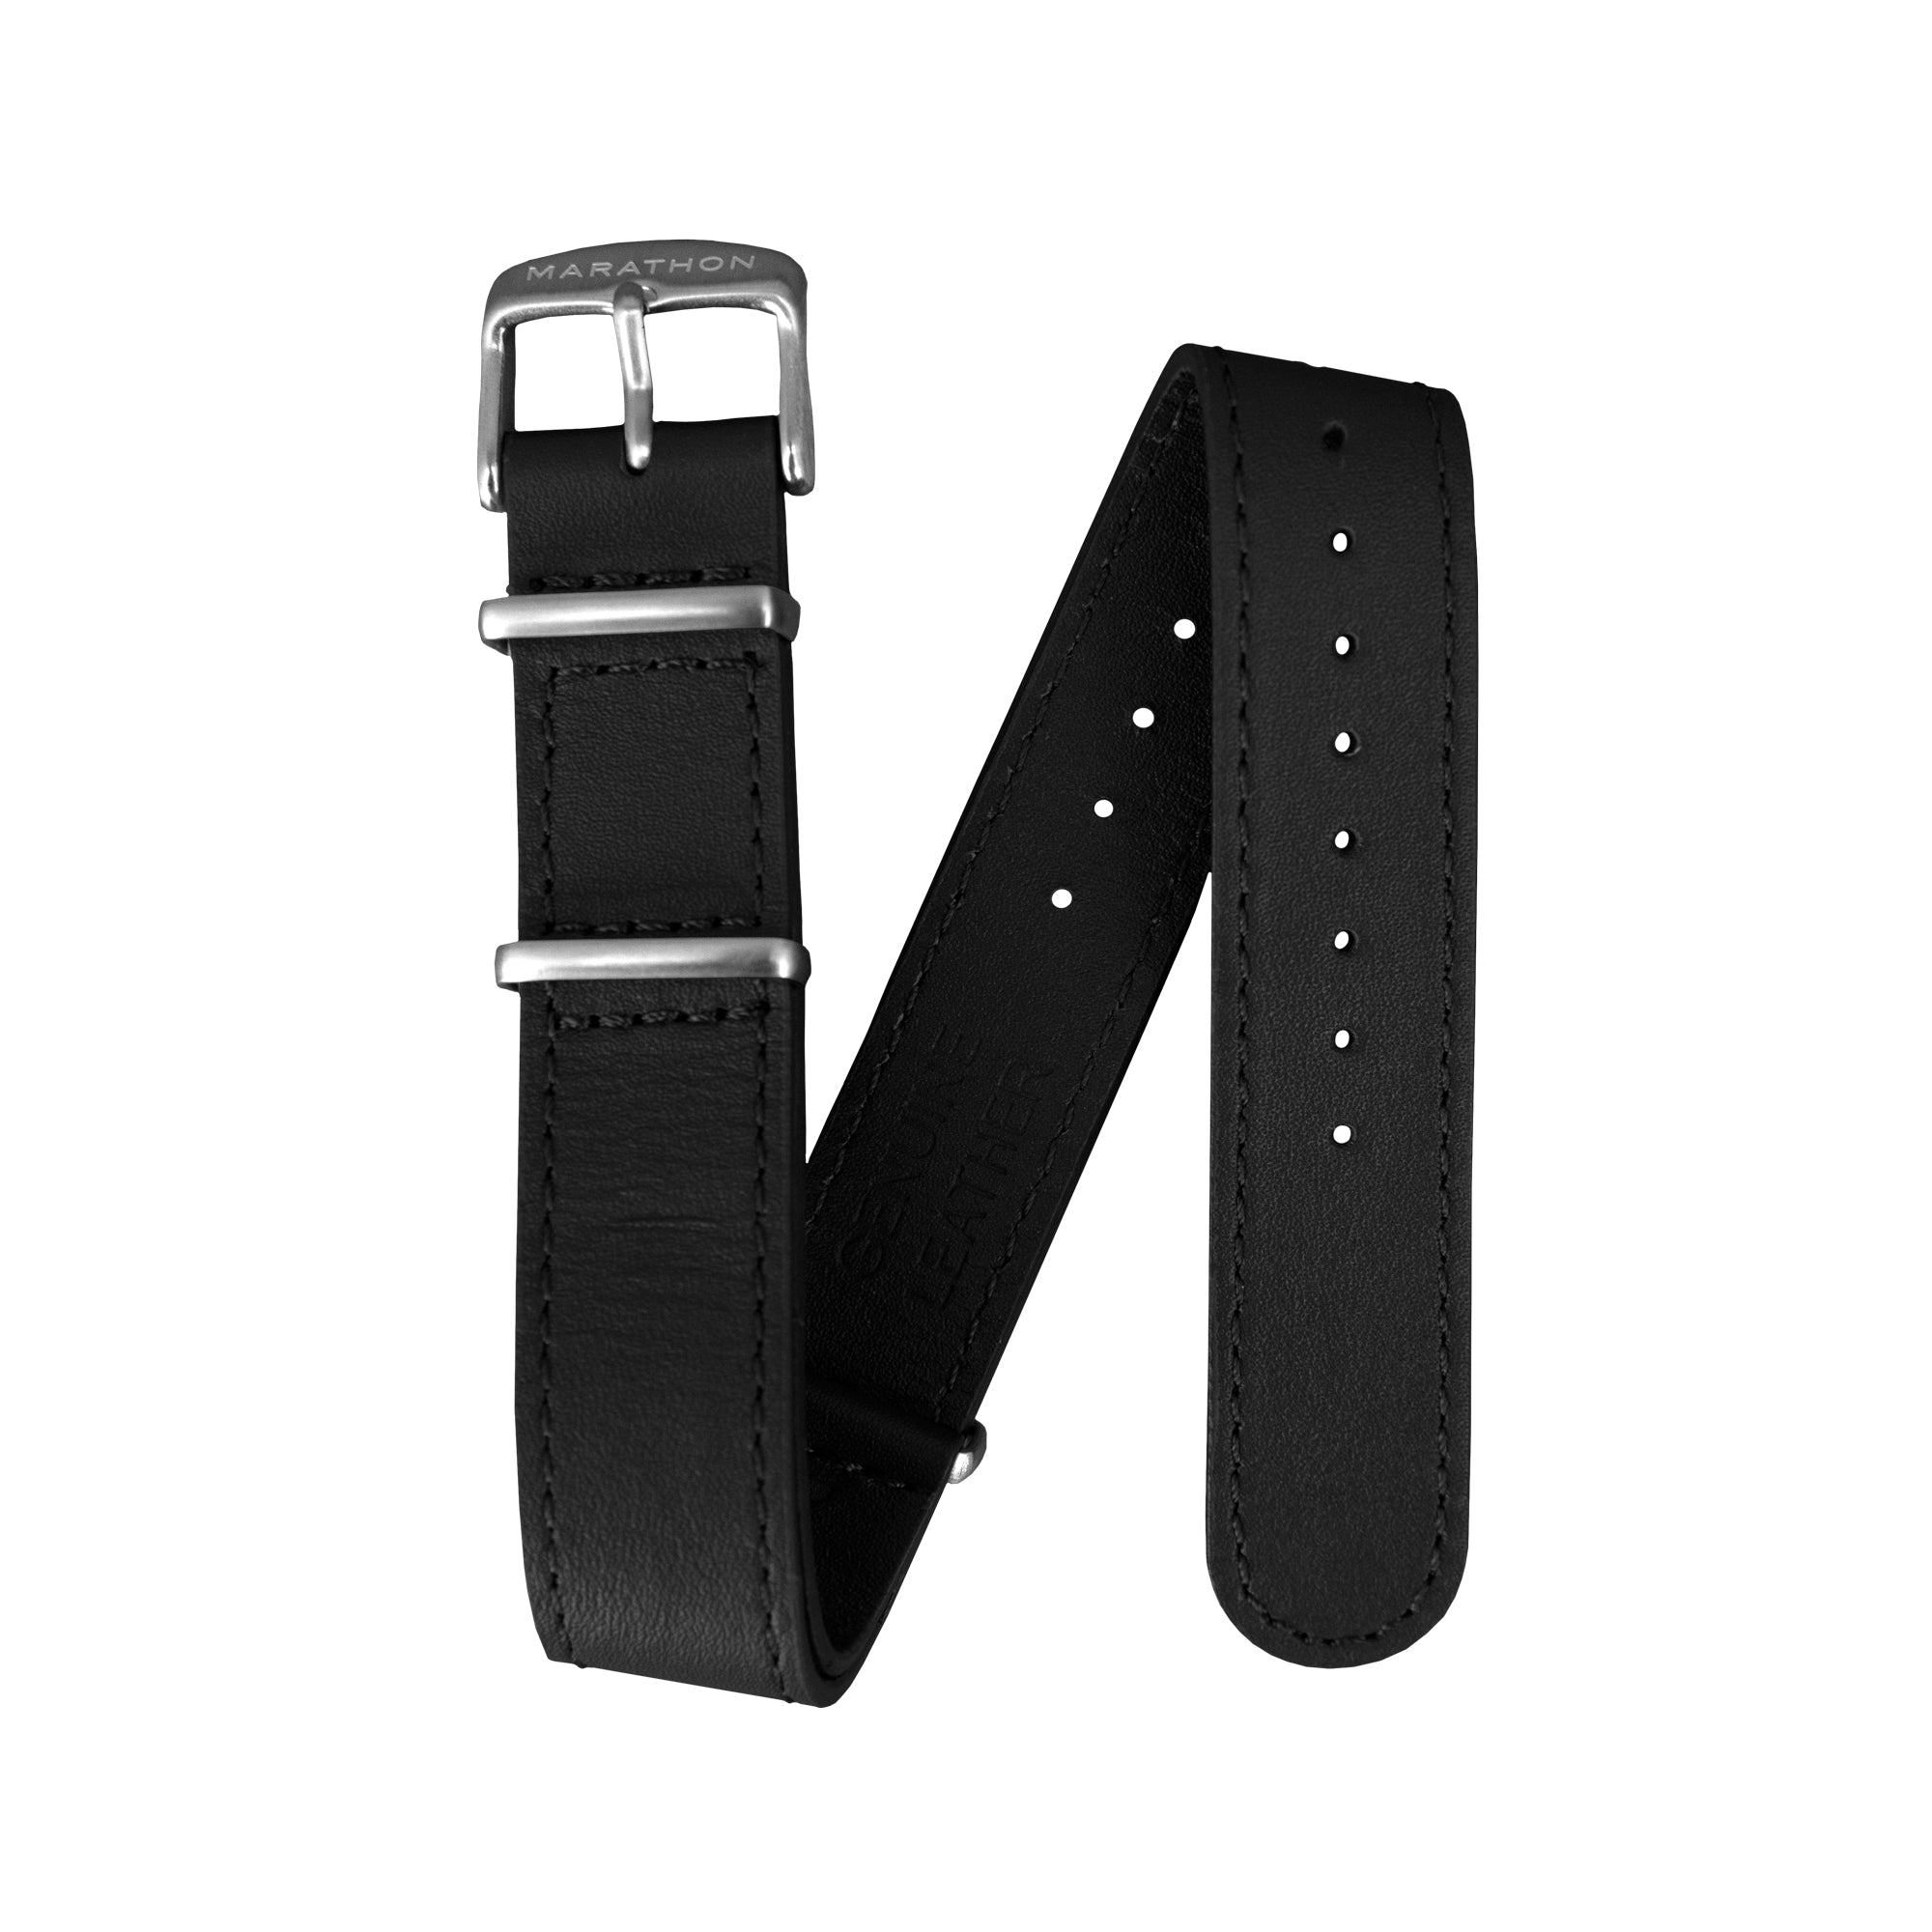 22mm Leather NATO Watch Band/Strap with Stainless Steel Square Buckle - marathonwatch